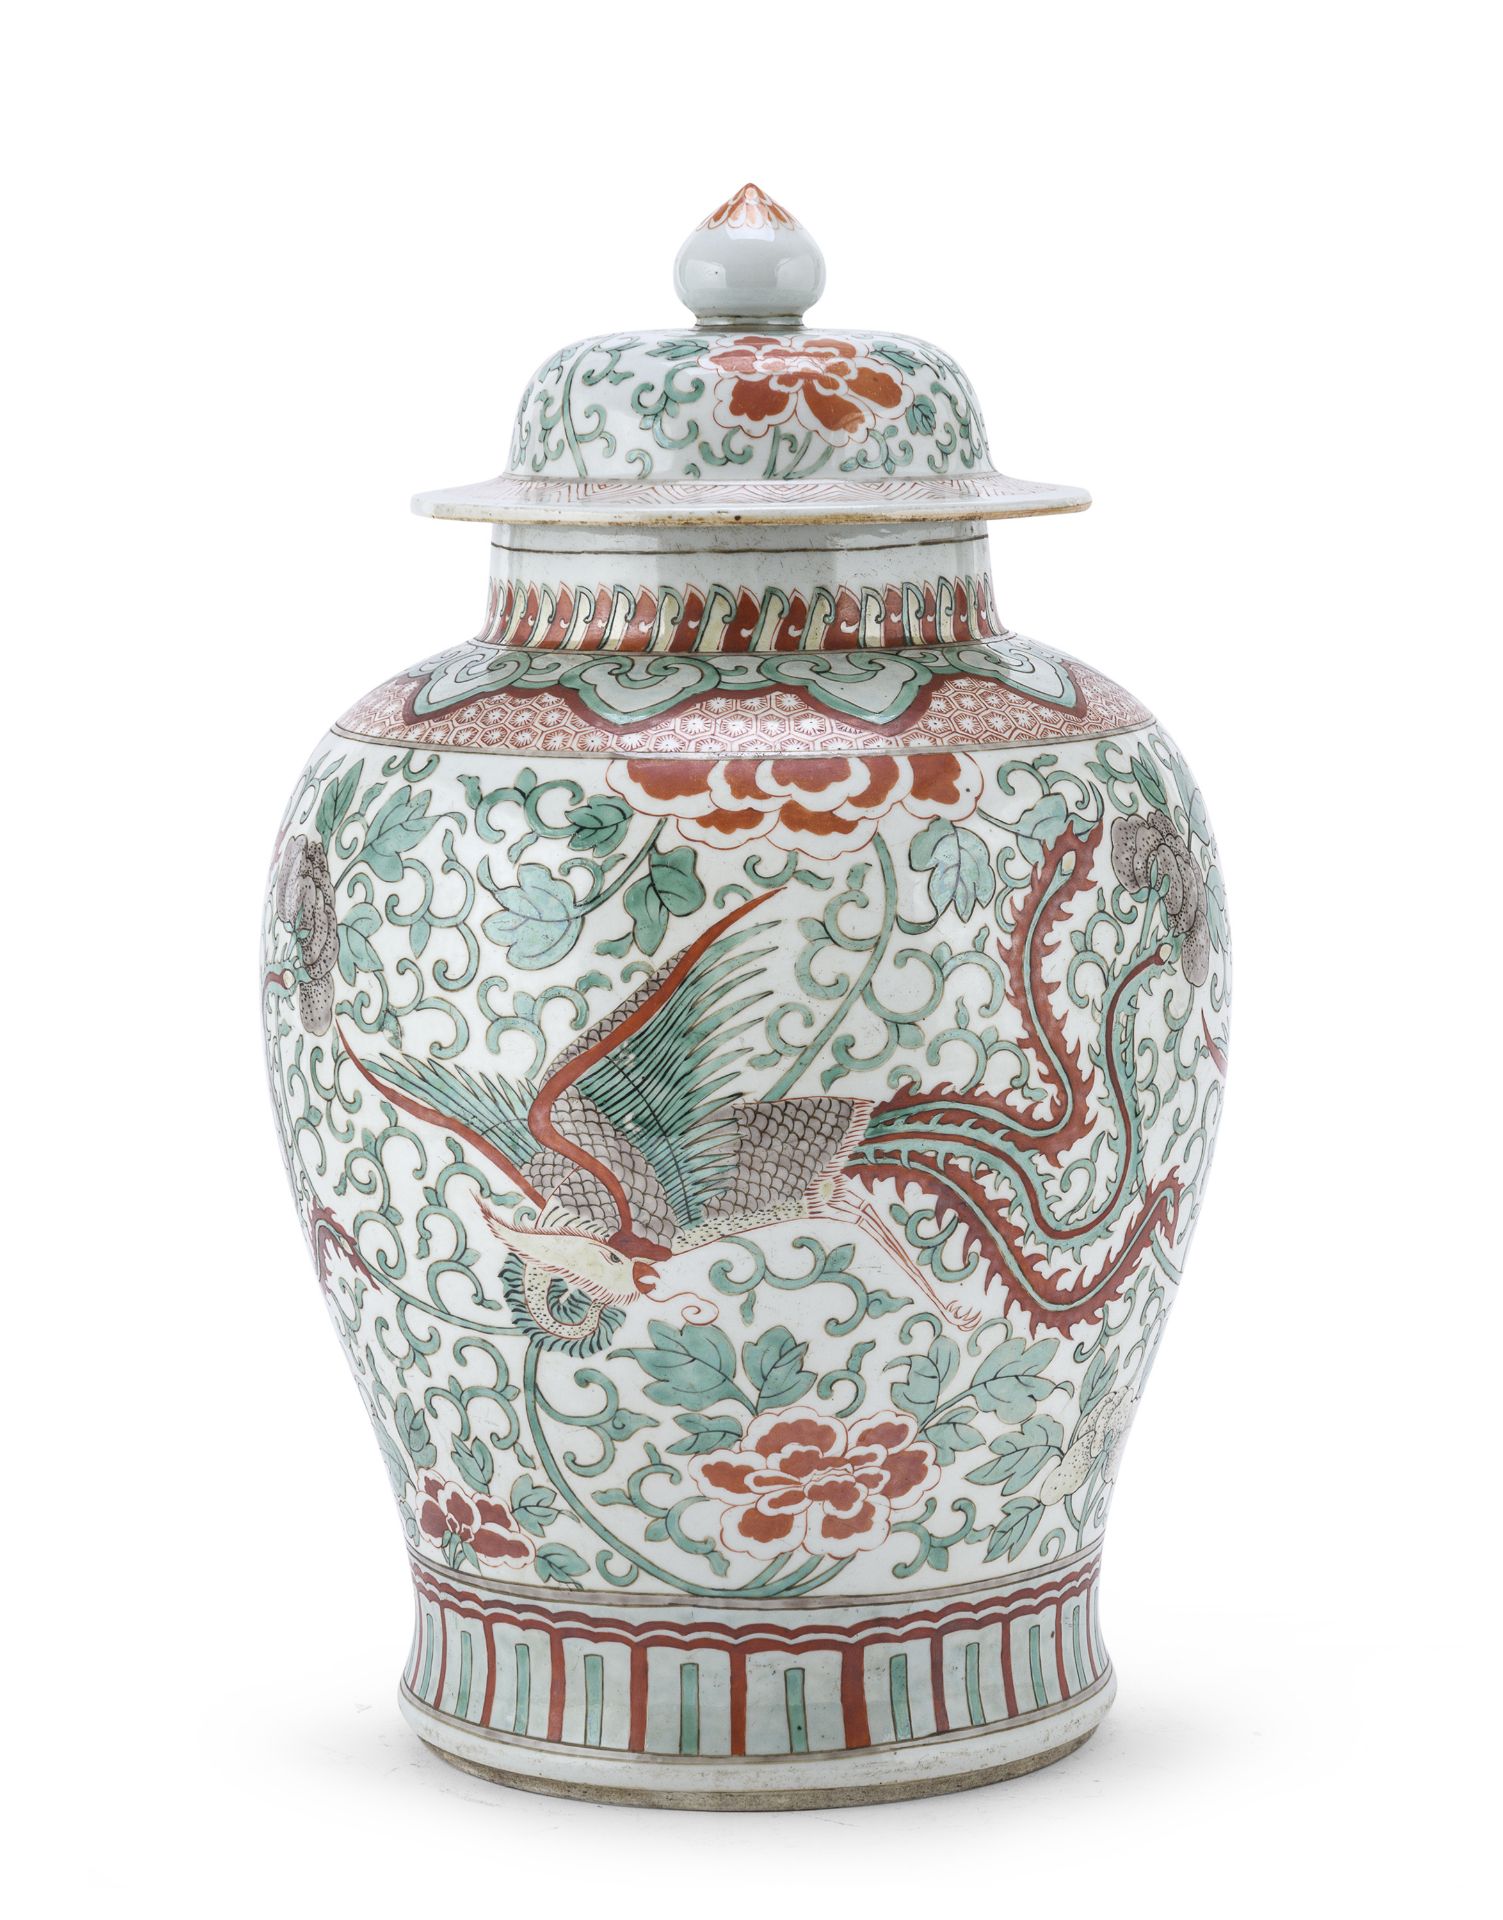 A CHINESE POLYCHROME ENAMELED PORCELAIN VASE WITH LID FIRST HALF 20TH CENTURY.